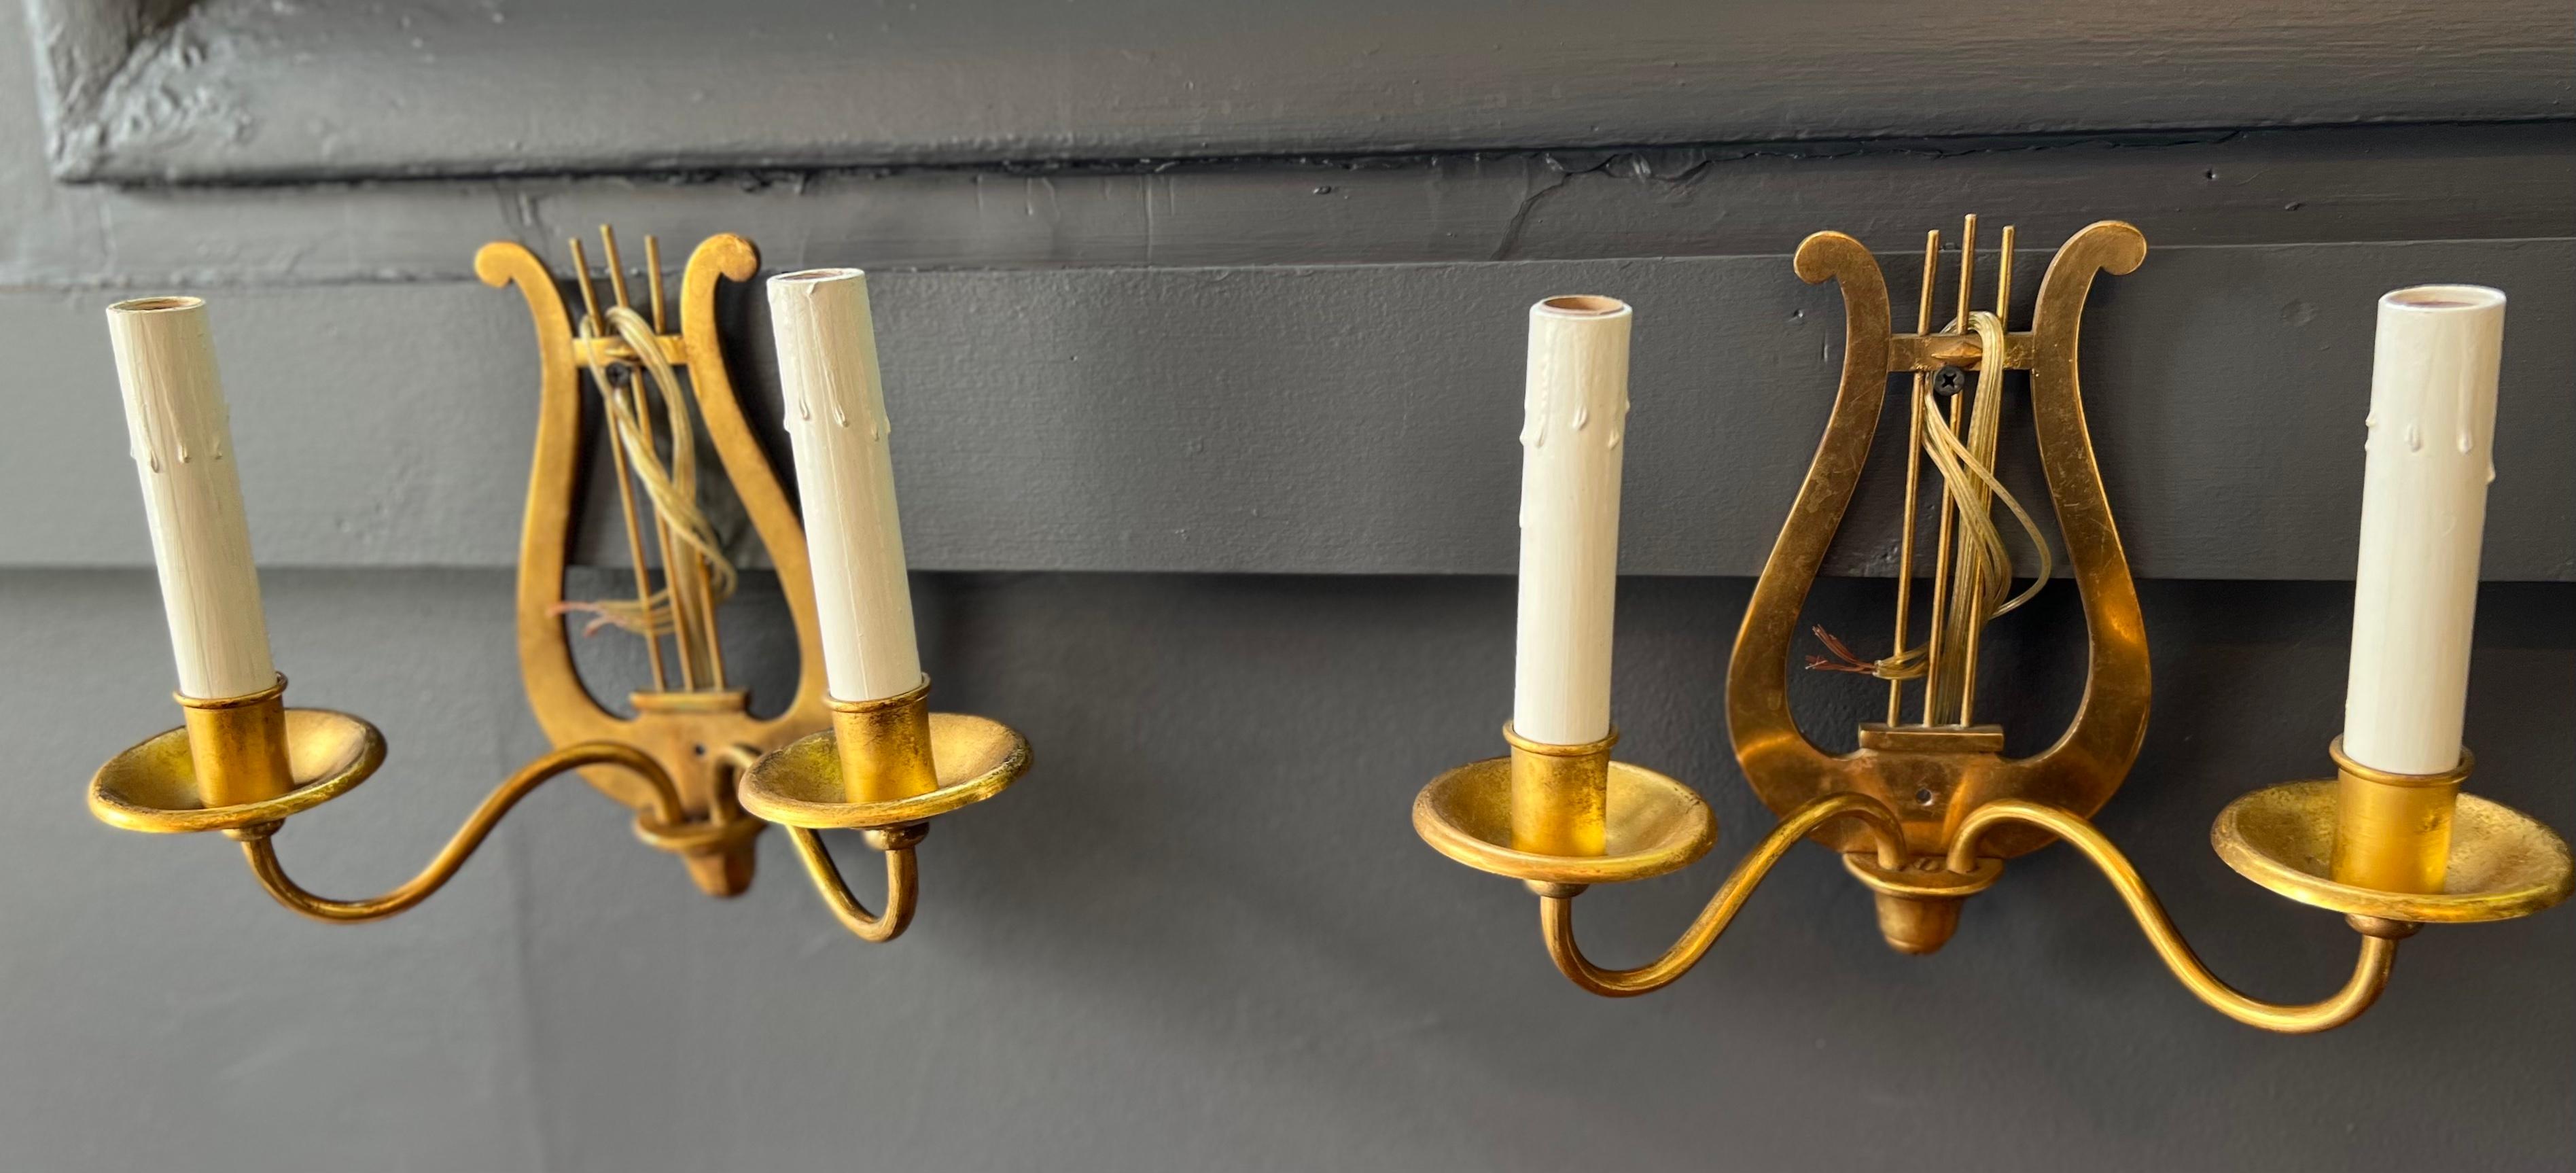 Set of 4 1940's French gilt metal candle sconces with wooden faux candles For Sale 7